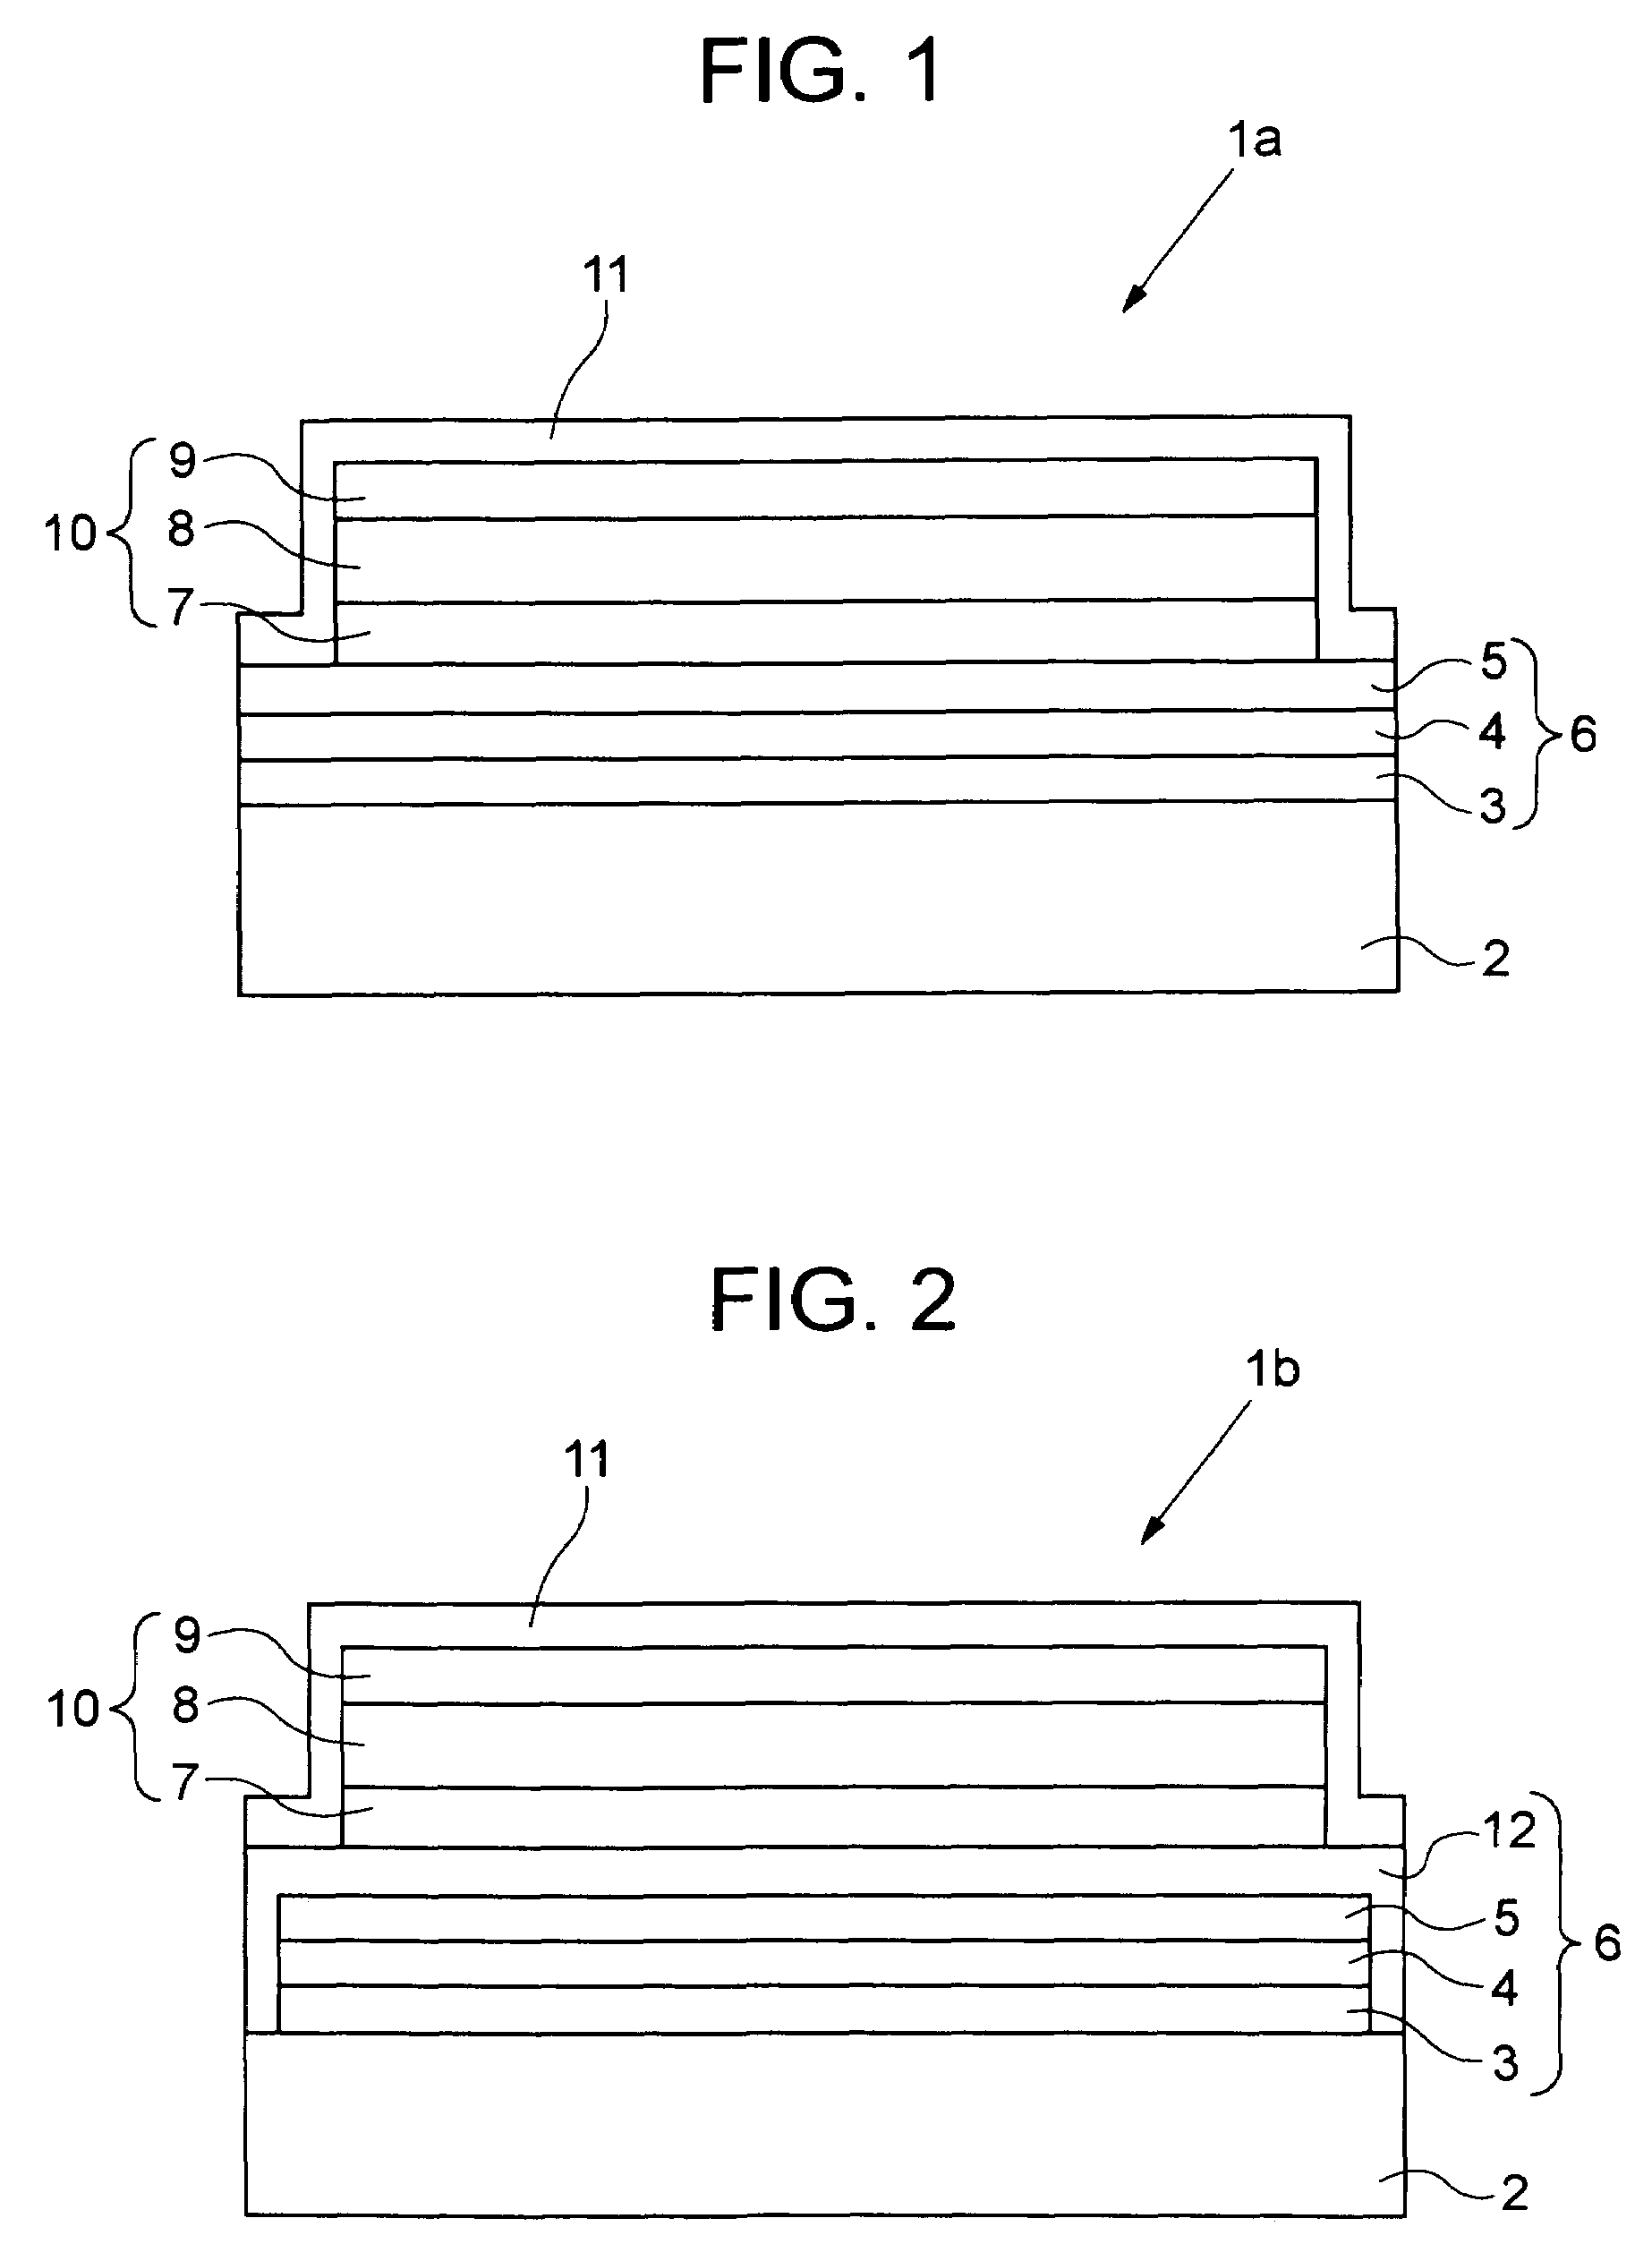 Organic electroluminescence display panel including a gas barrier laminate between a substrate and an organic electroluminescence element